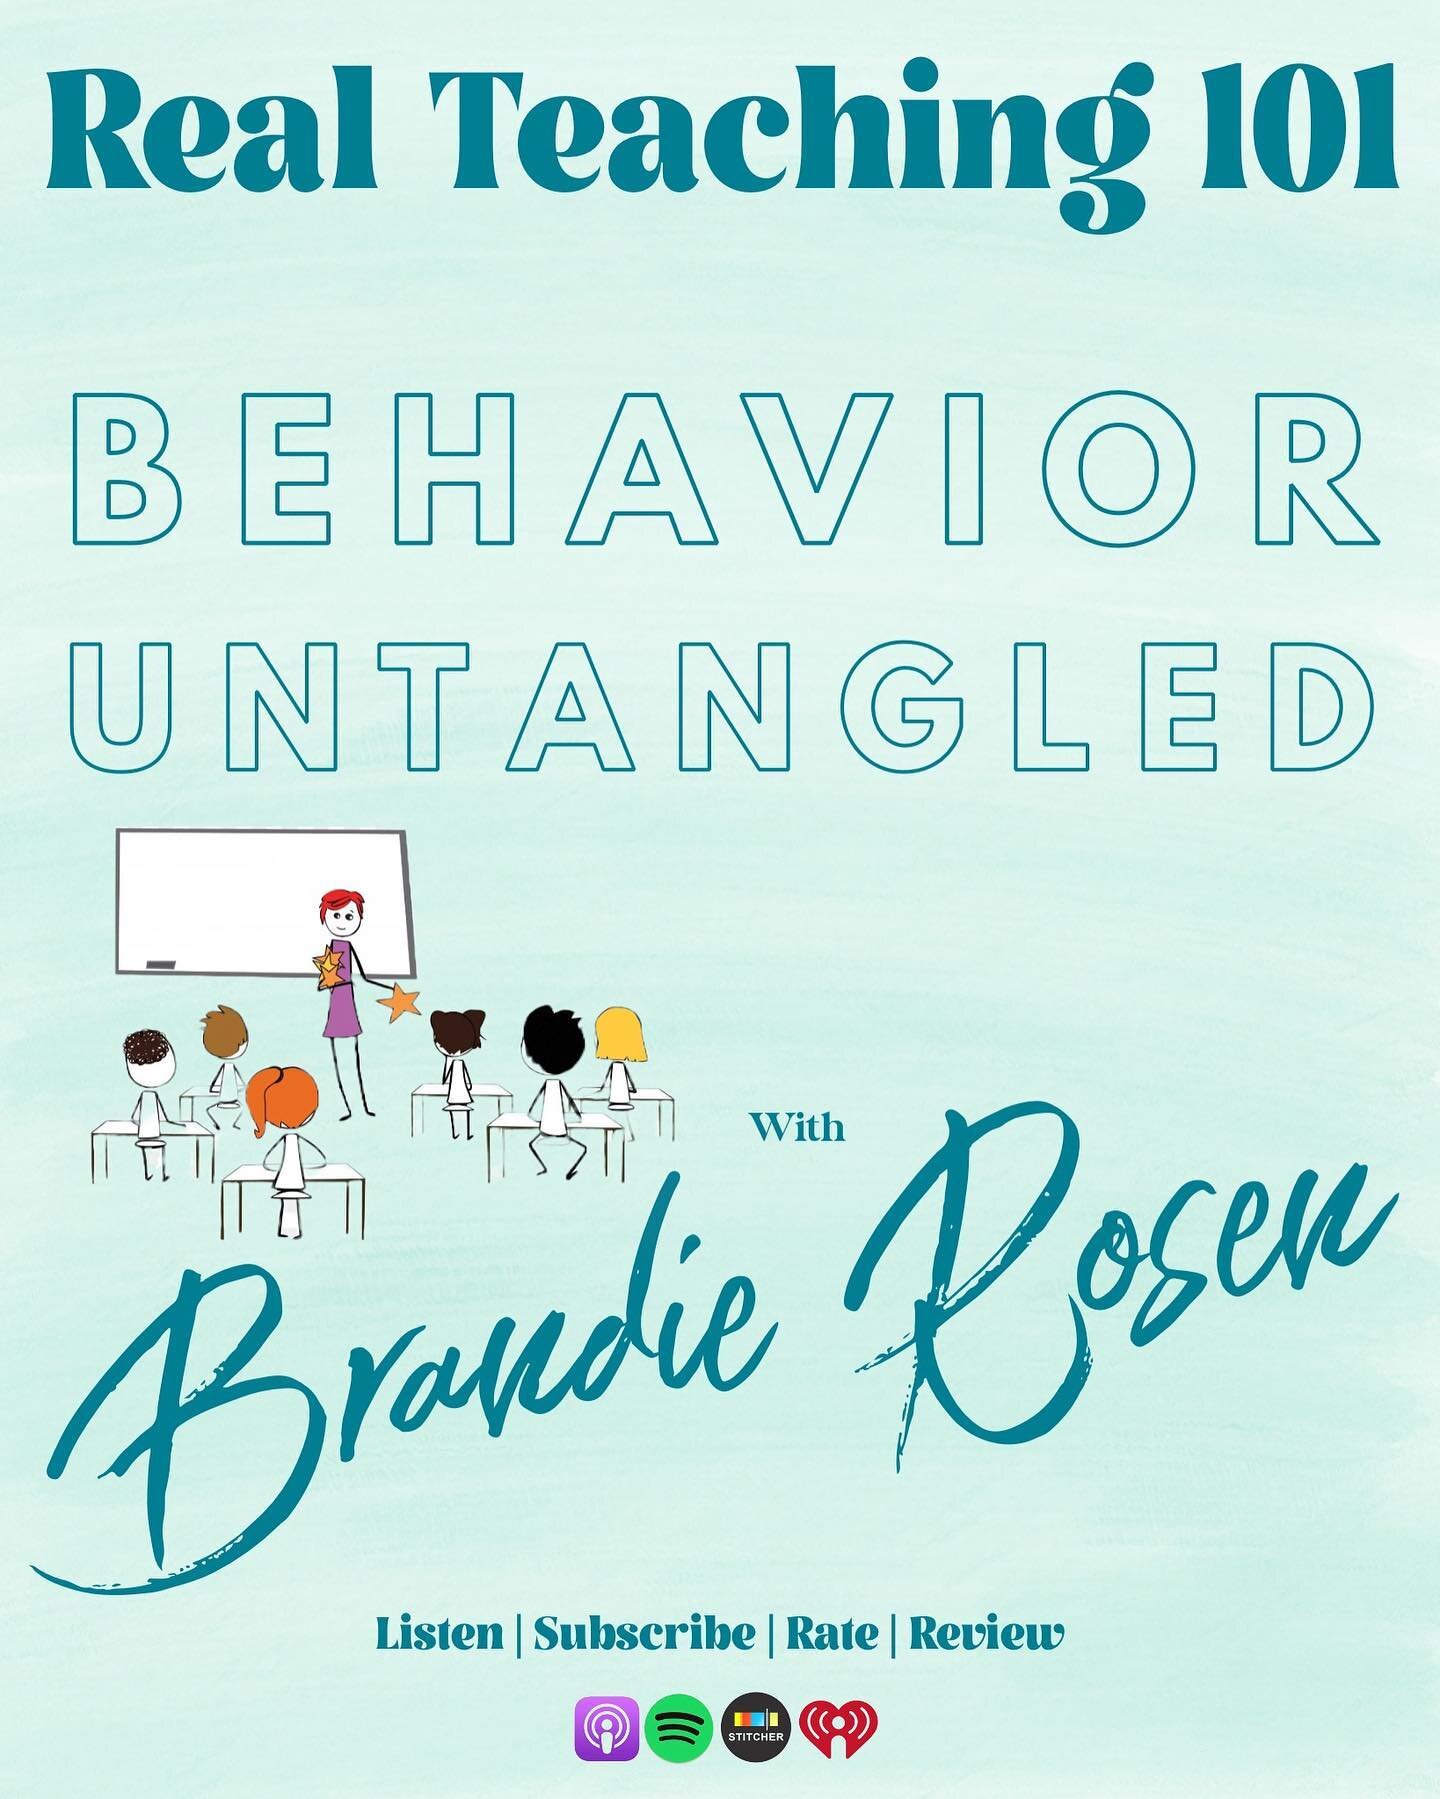 This week Meagan chats with Brandie Rosen of Teaching Untangled. 

Brandie discusses the ins and outs of student behaviors, and shares how teachers can better serve their students with inclusive classroom management.

Come away with a new perspective